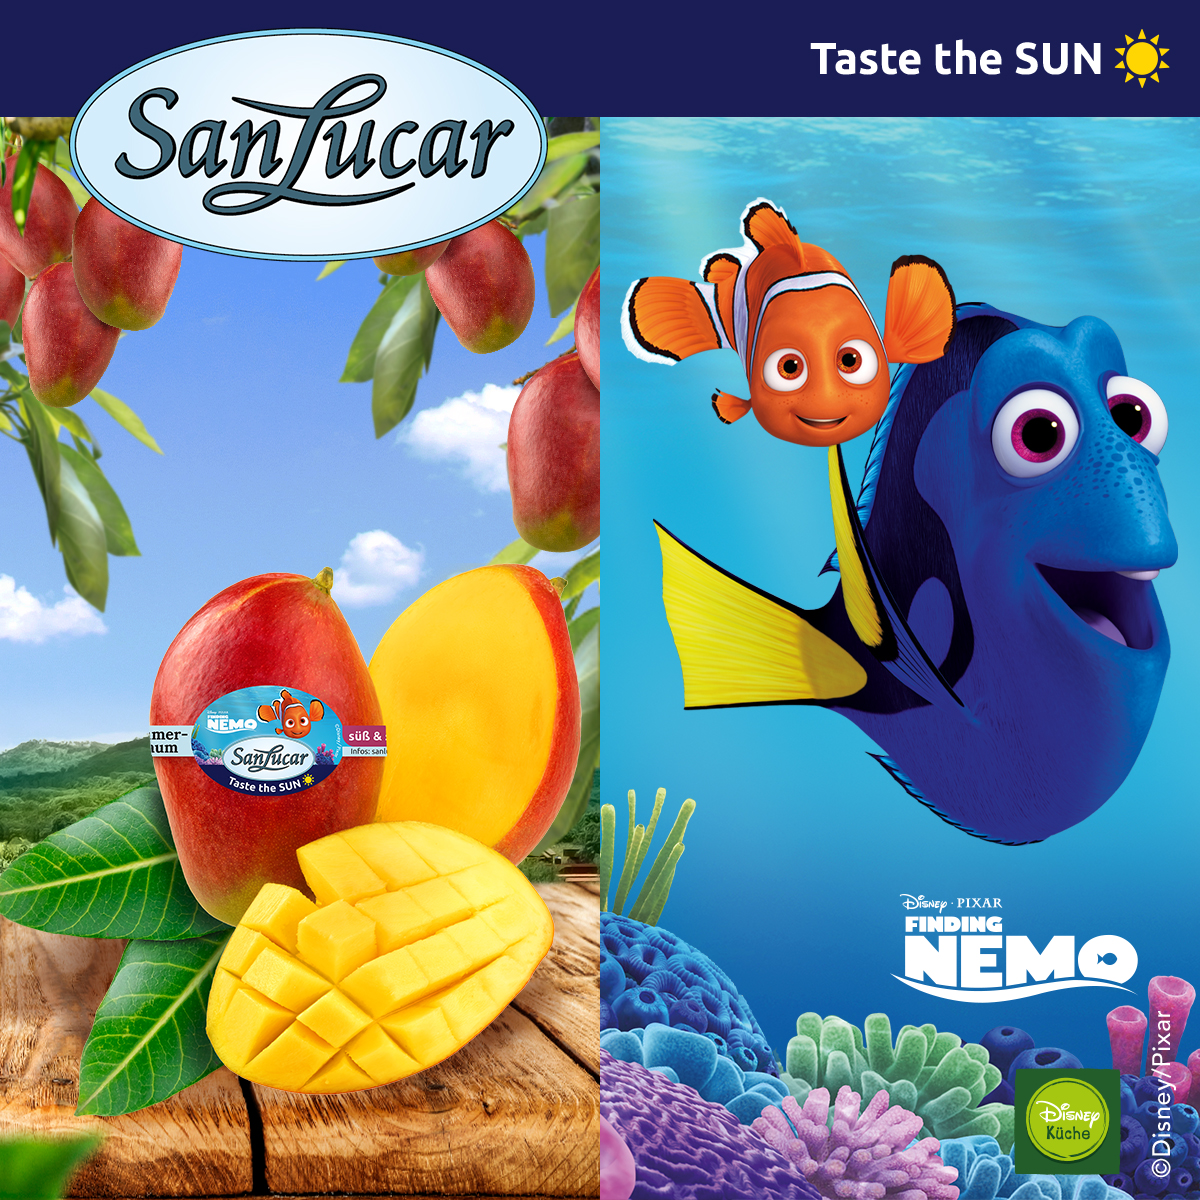 The colorful world of Nemo and SanLucar fruits together in the premium brand’s new promotion